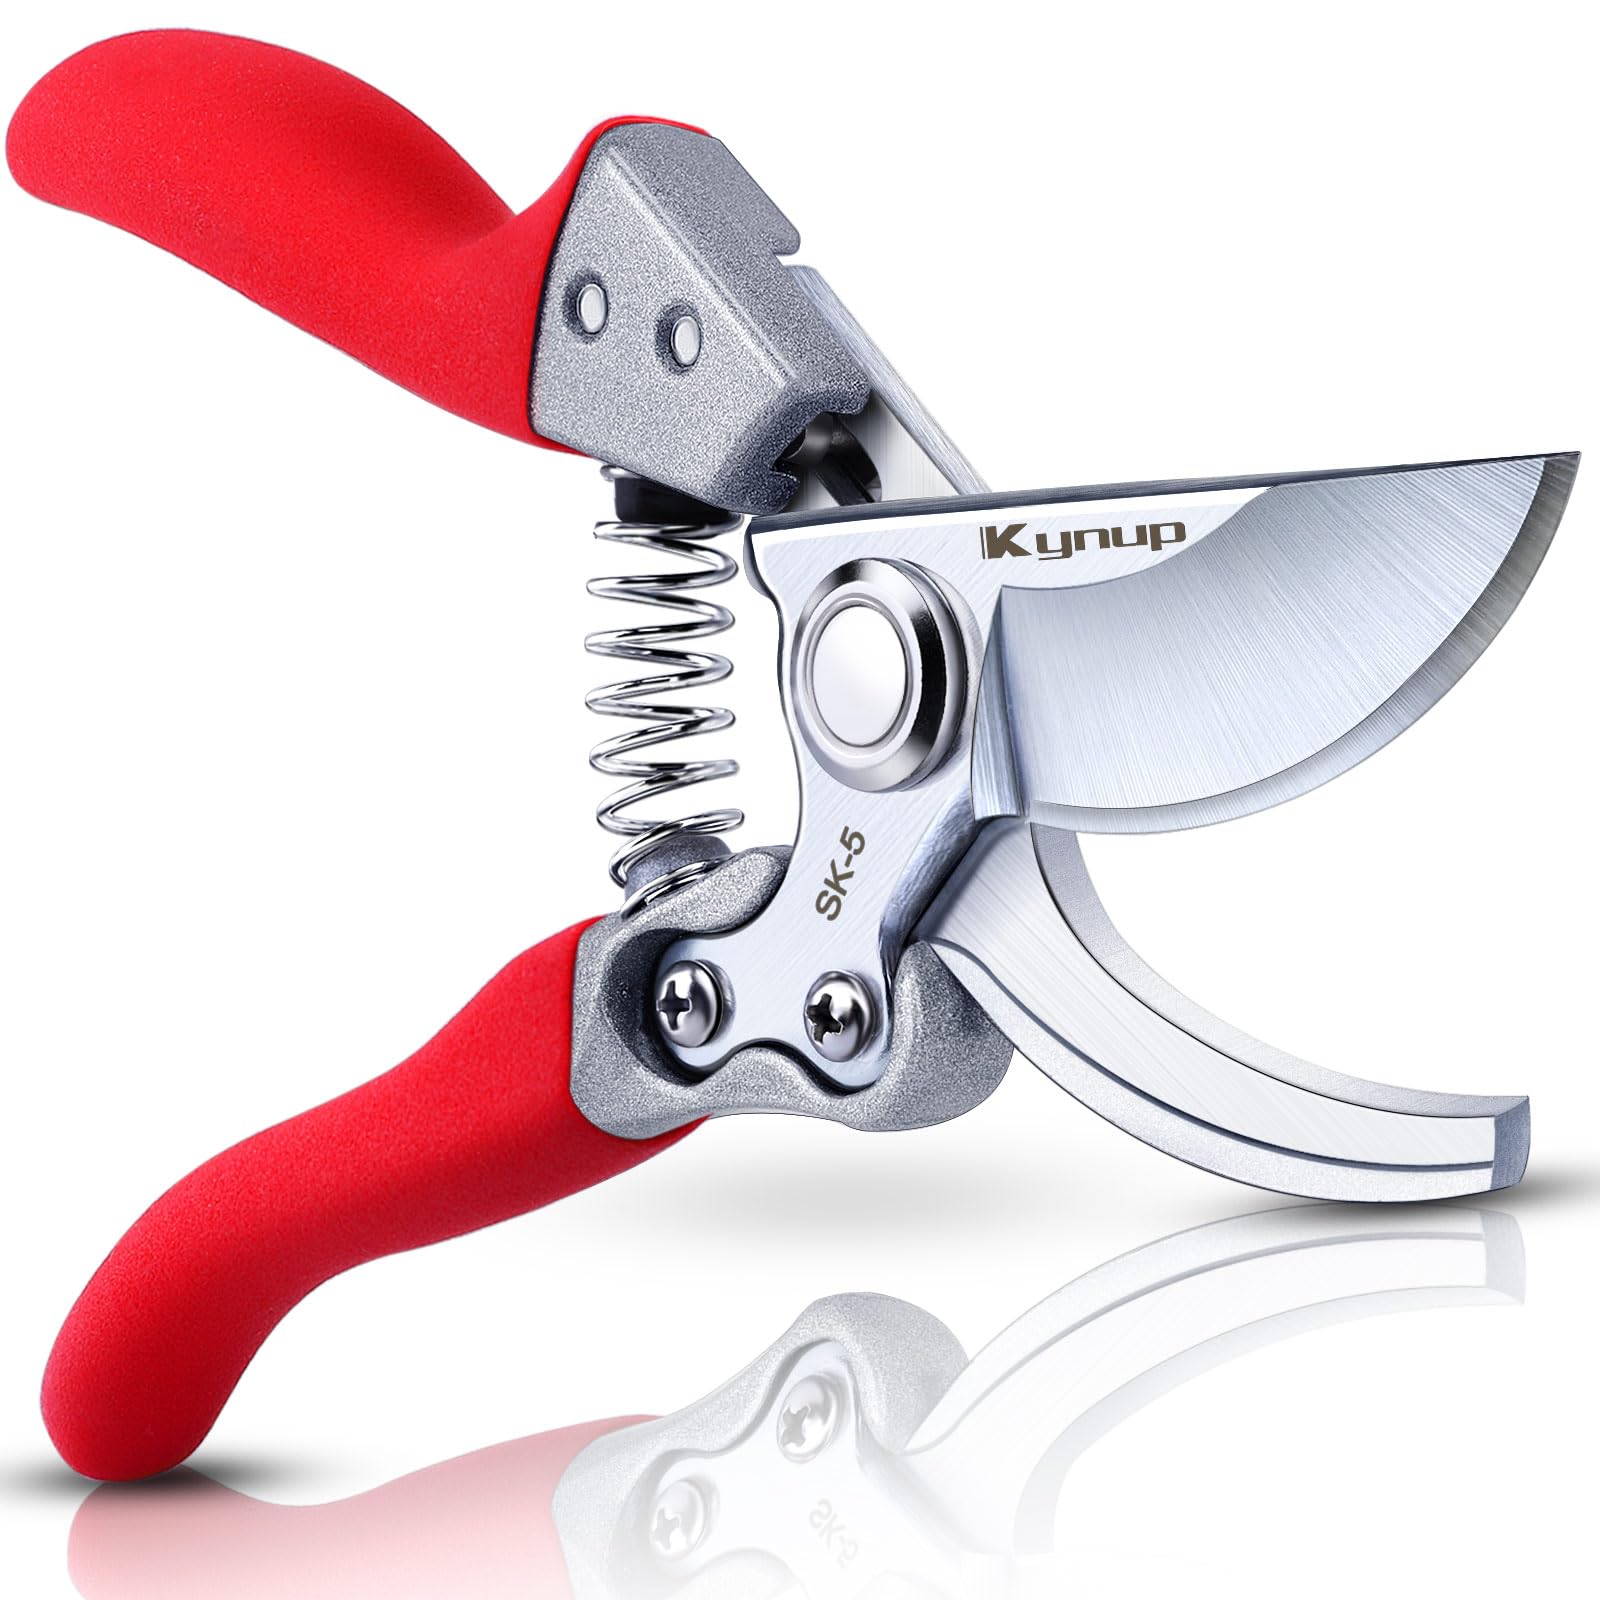 Kynup Pruning Shears for Gardening on Amazon $11.89